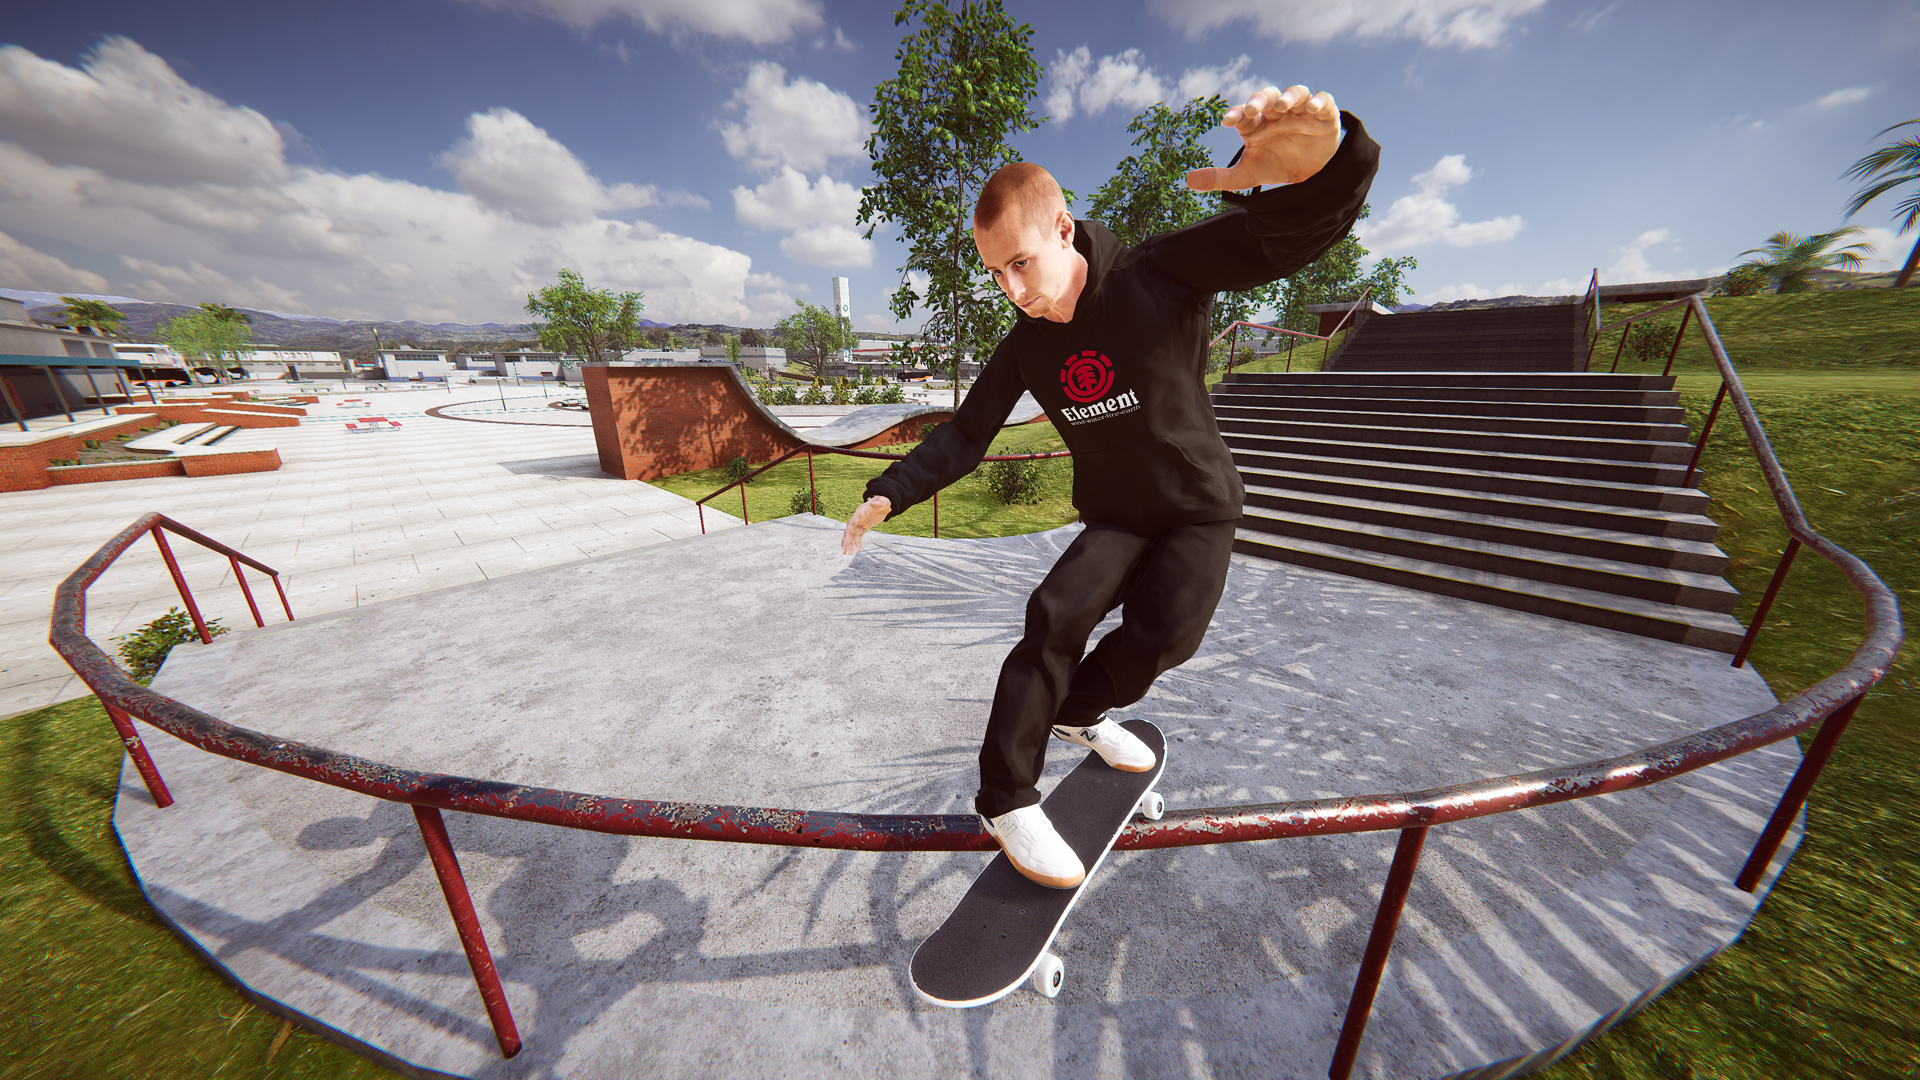 new skate game ps4